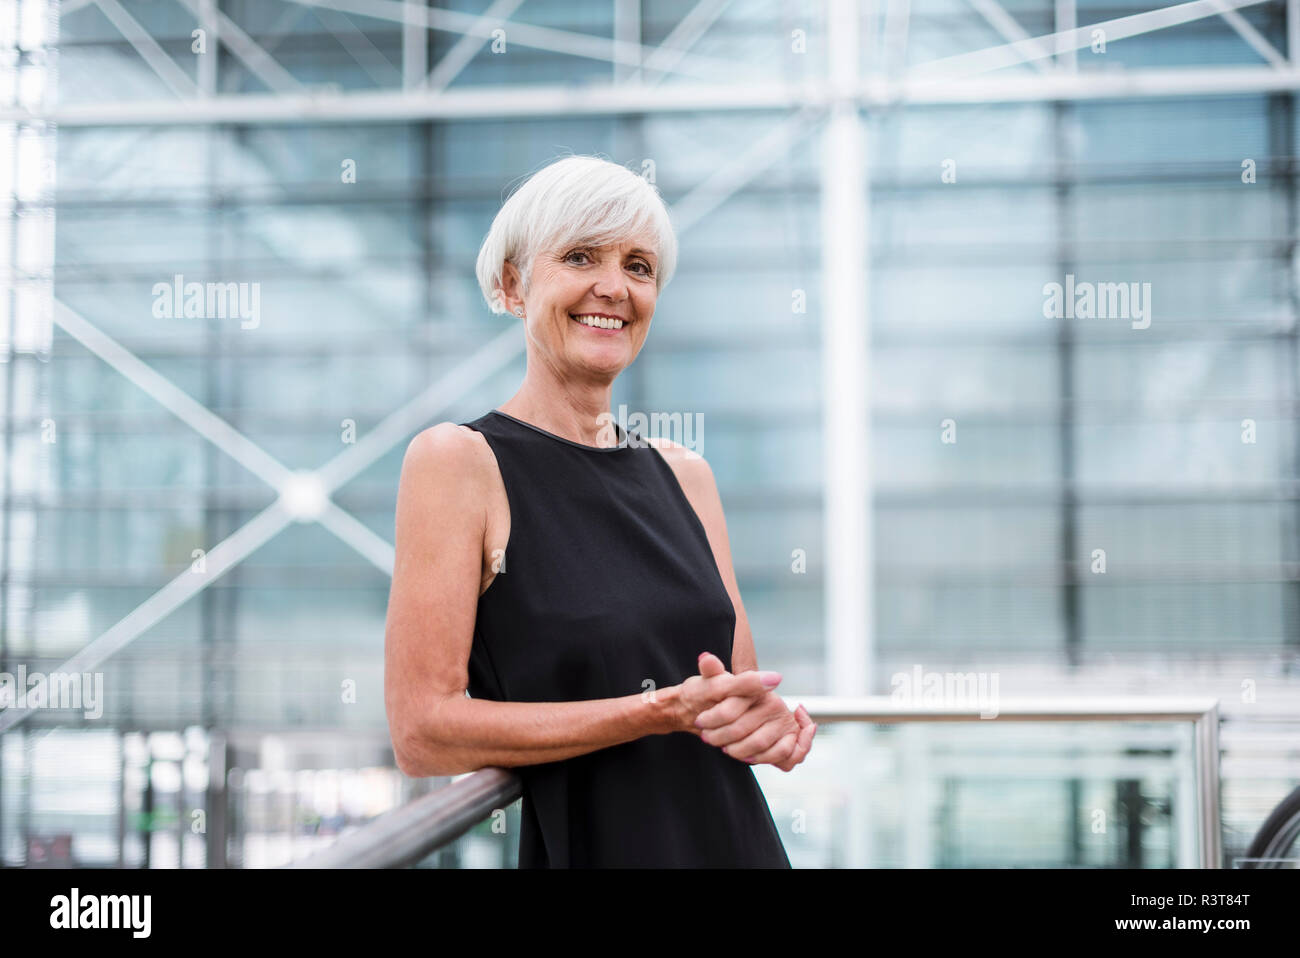 Portrait of smiling senior woman wearing black dress leaning against a railing Stock Photo